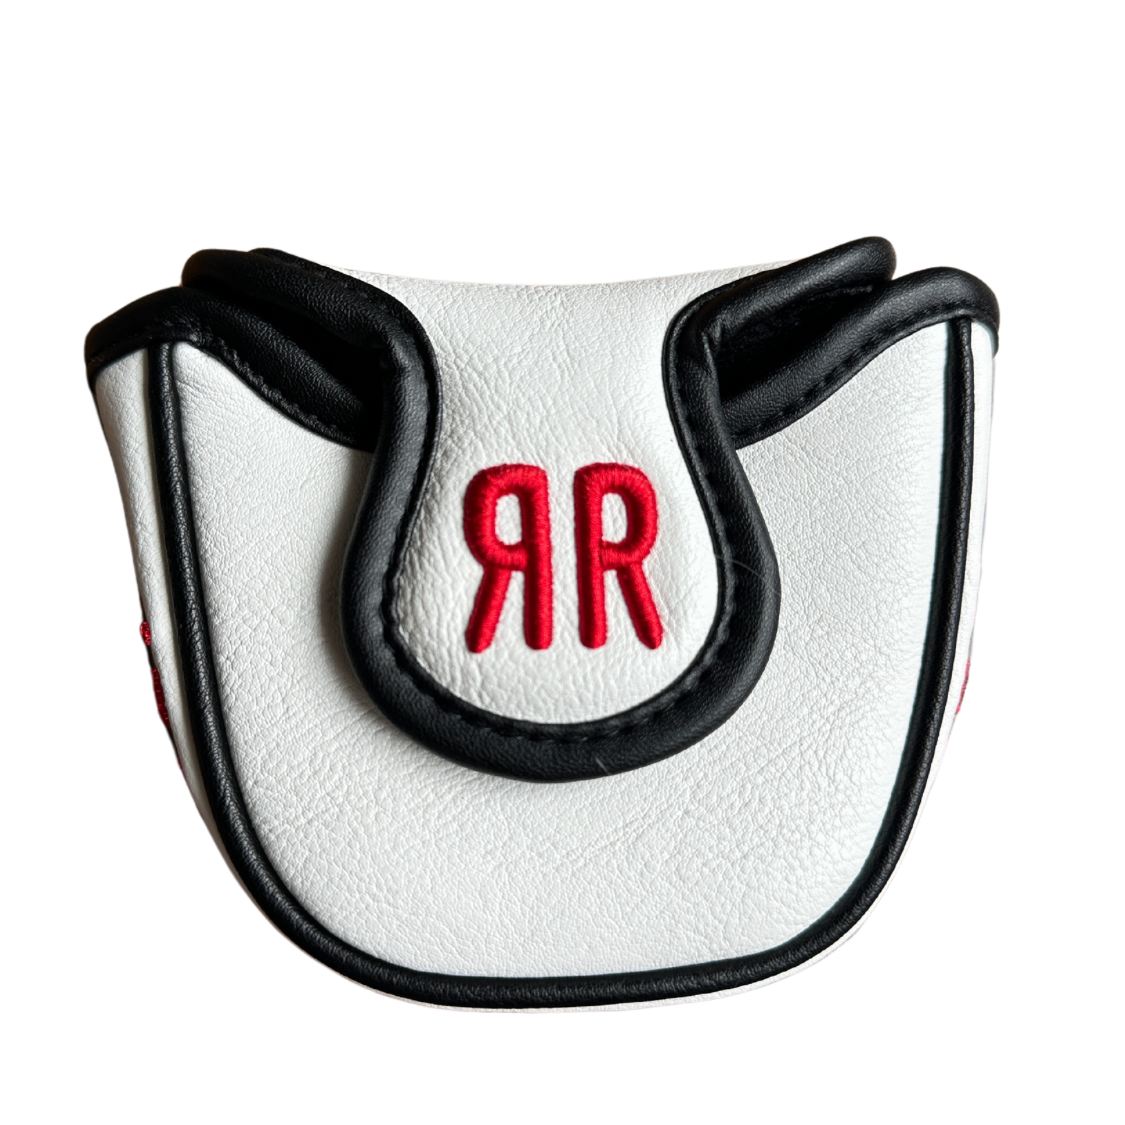 Mallet Putter - The Lair (White)